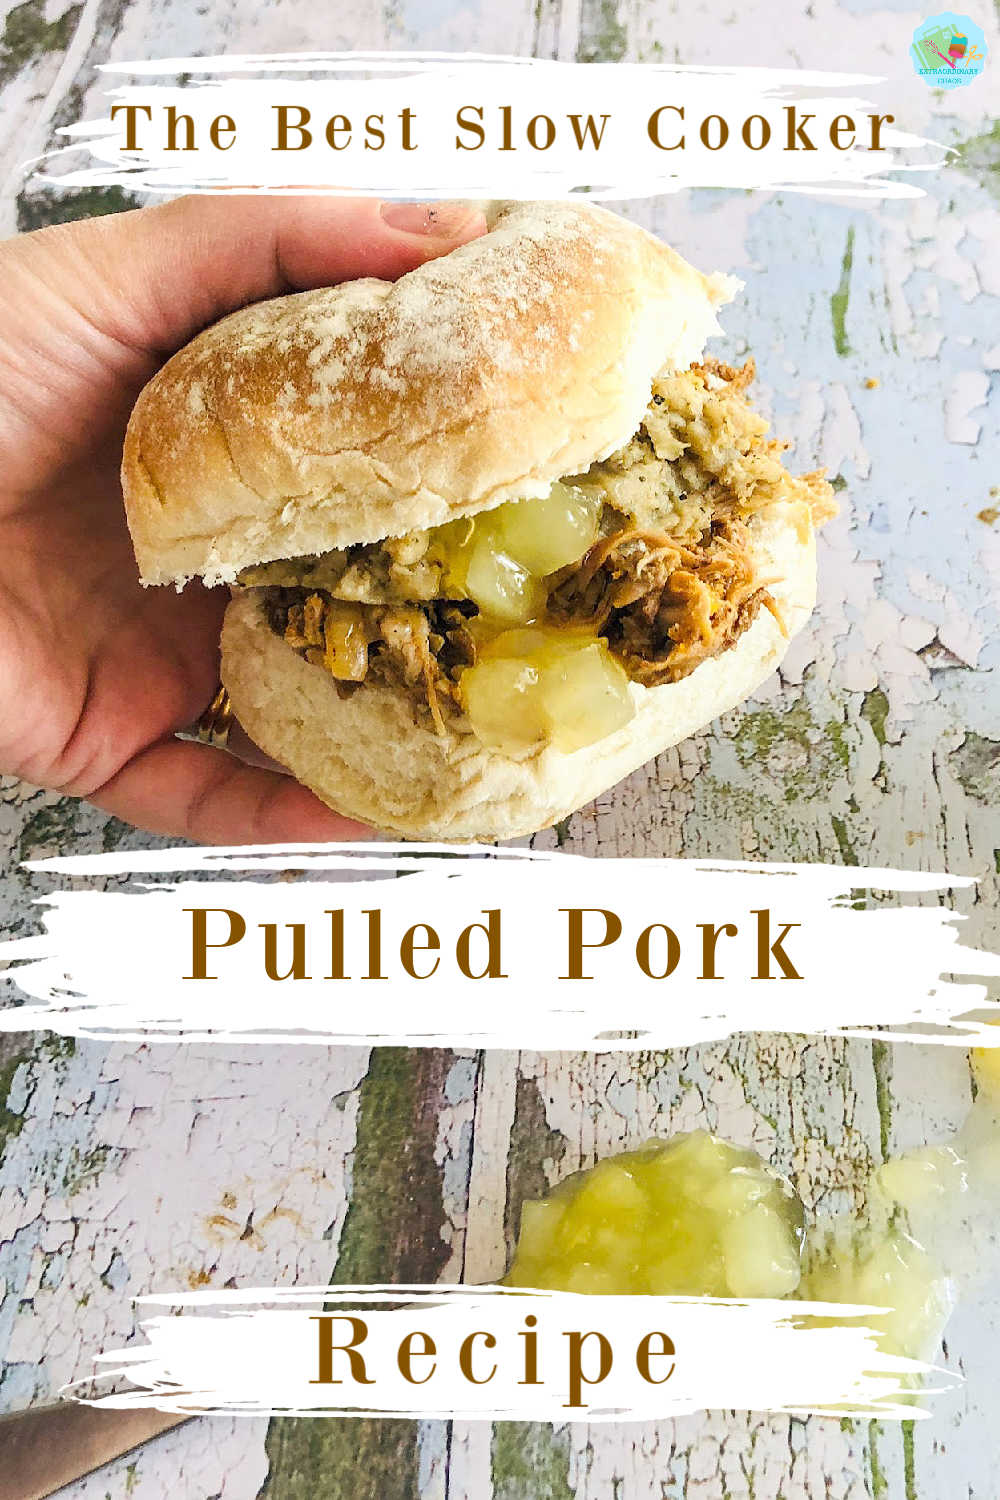 The best slow cooker Pulled pork recipe